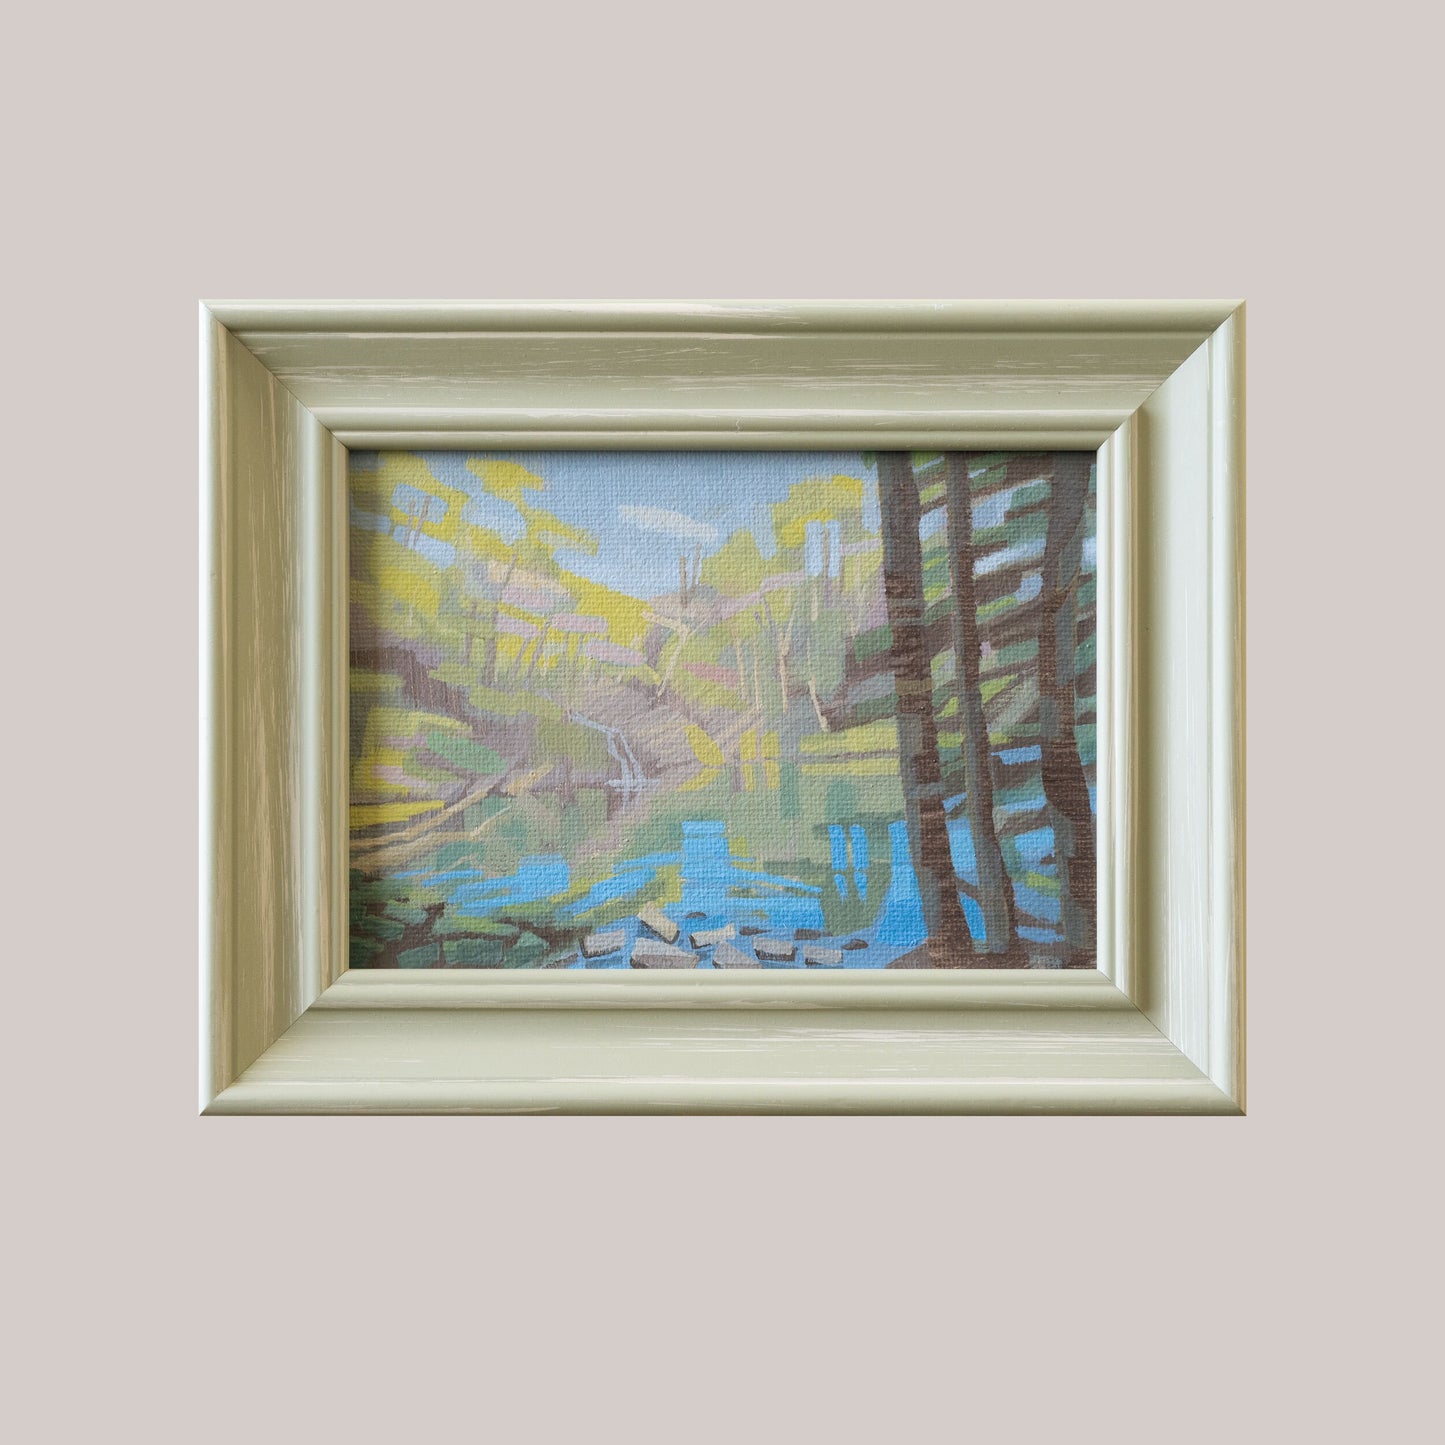 Original painting - "Forest Lake" - hand painted - acrylic painting - 10x15 cm - landscape picture - unique piece - with frame